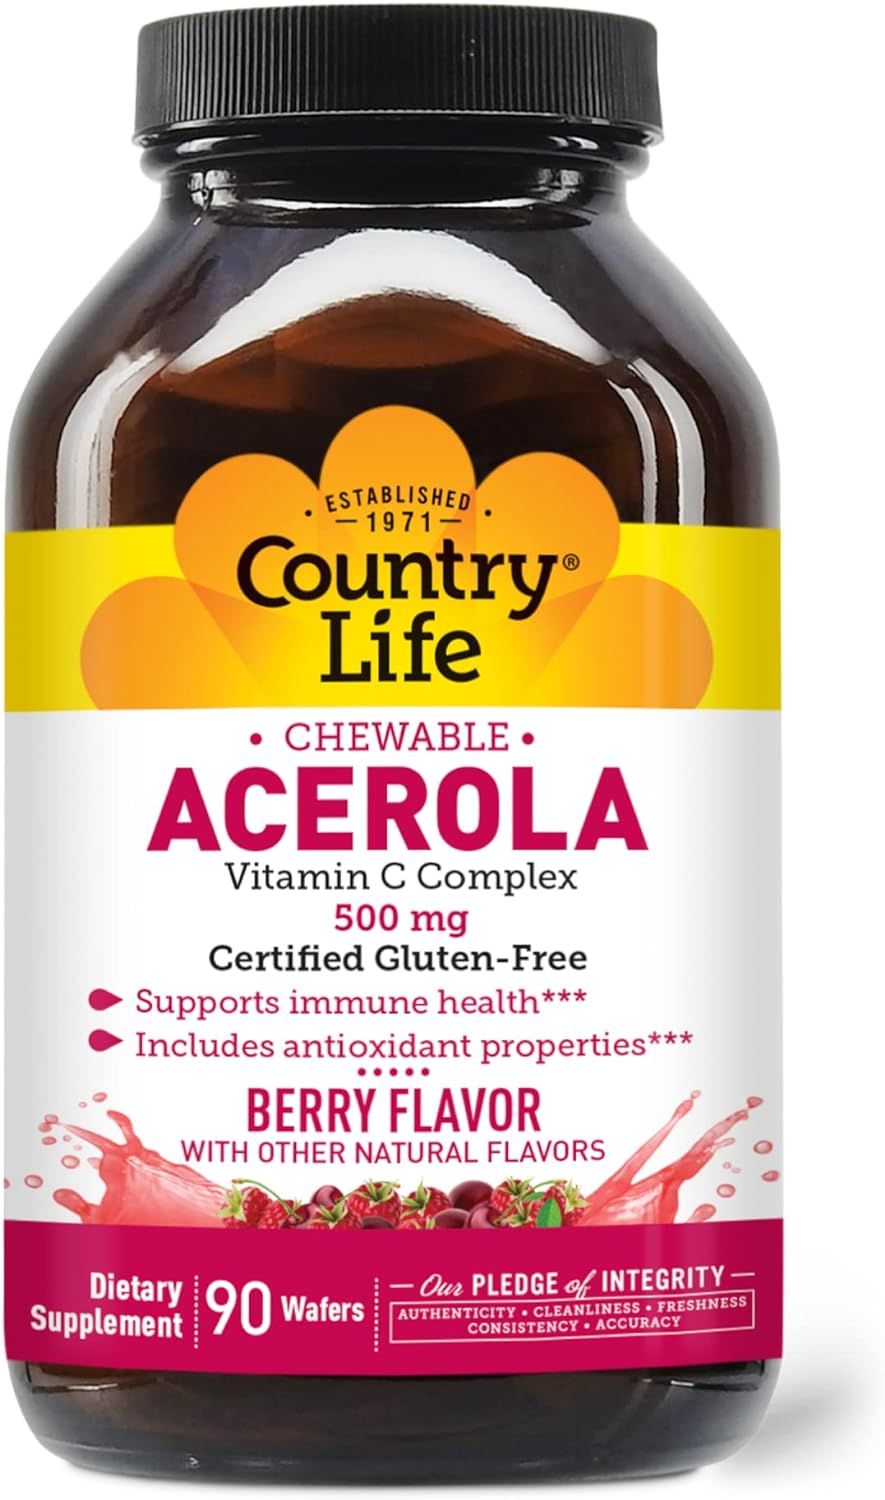 Country Life Acerola Vitamin C Complex, 500mg, Chewable Berry Flavored Wafers, Supports Immune Health, 90 Wafers, Certified Gluten Free by GFCO, Certified Vegan by AVA